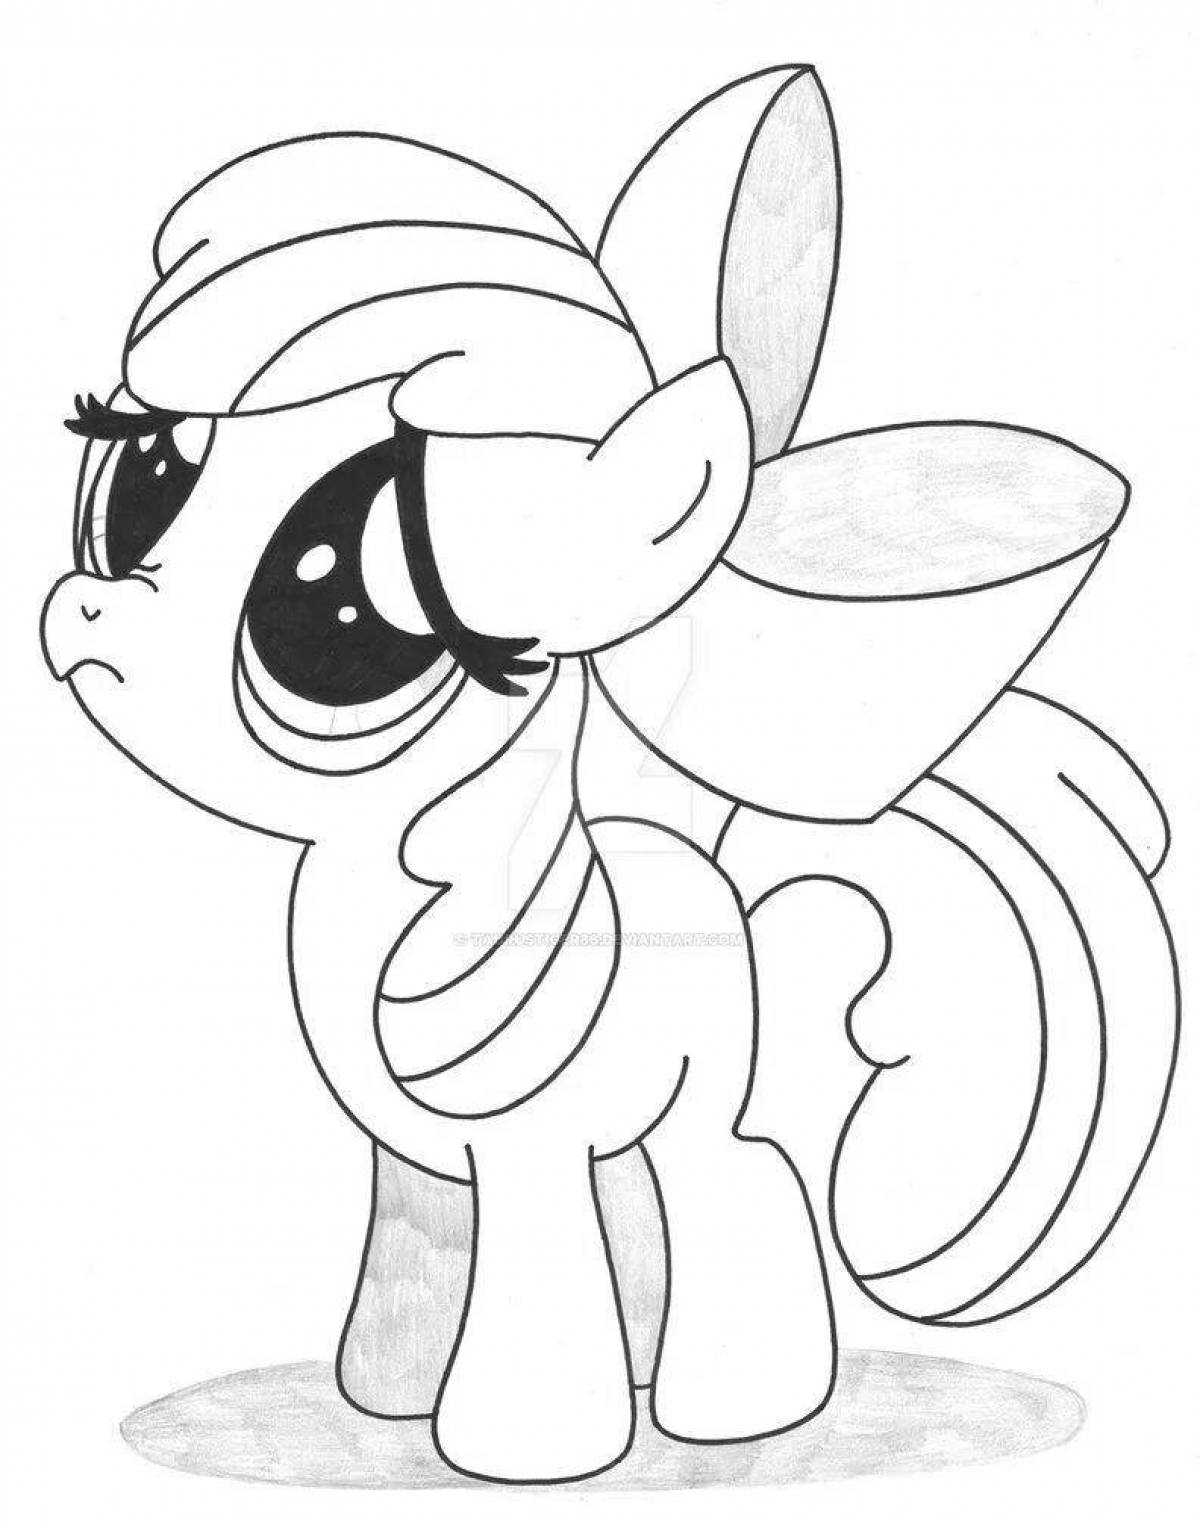 Playful apple bloom coloring book